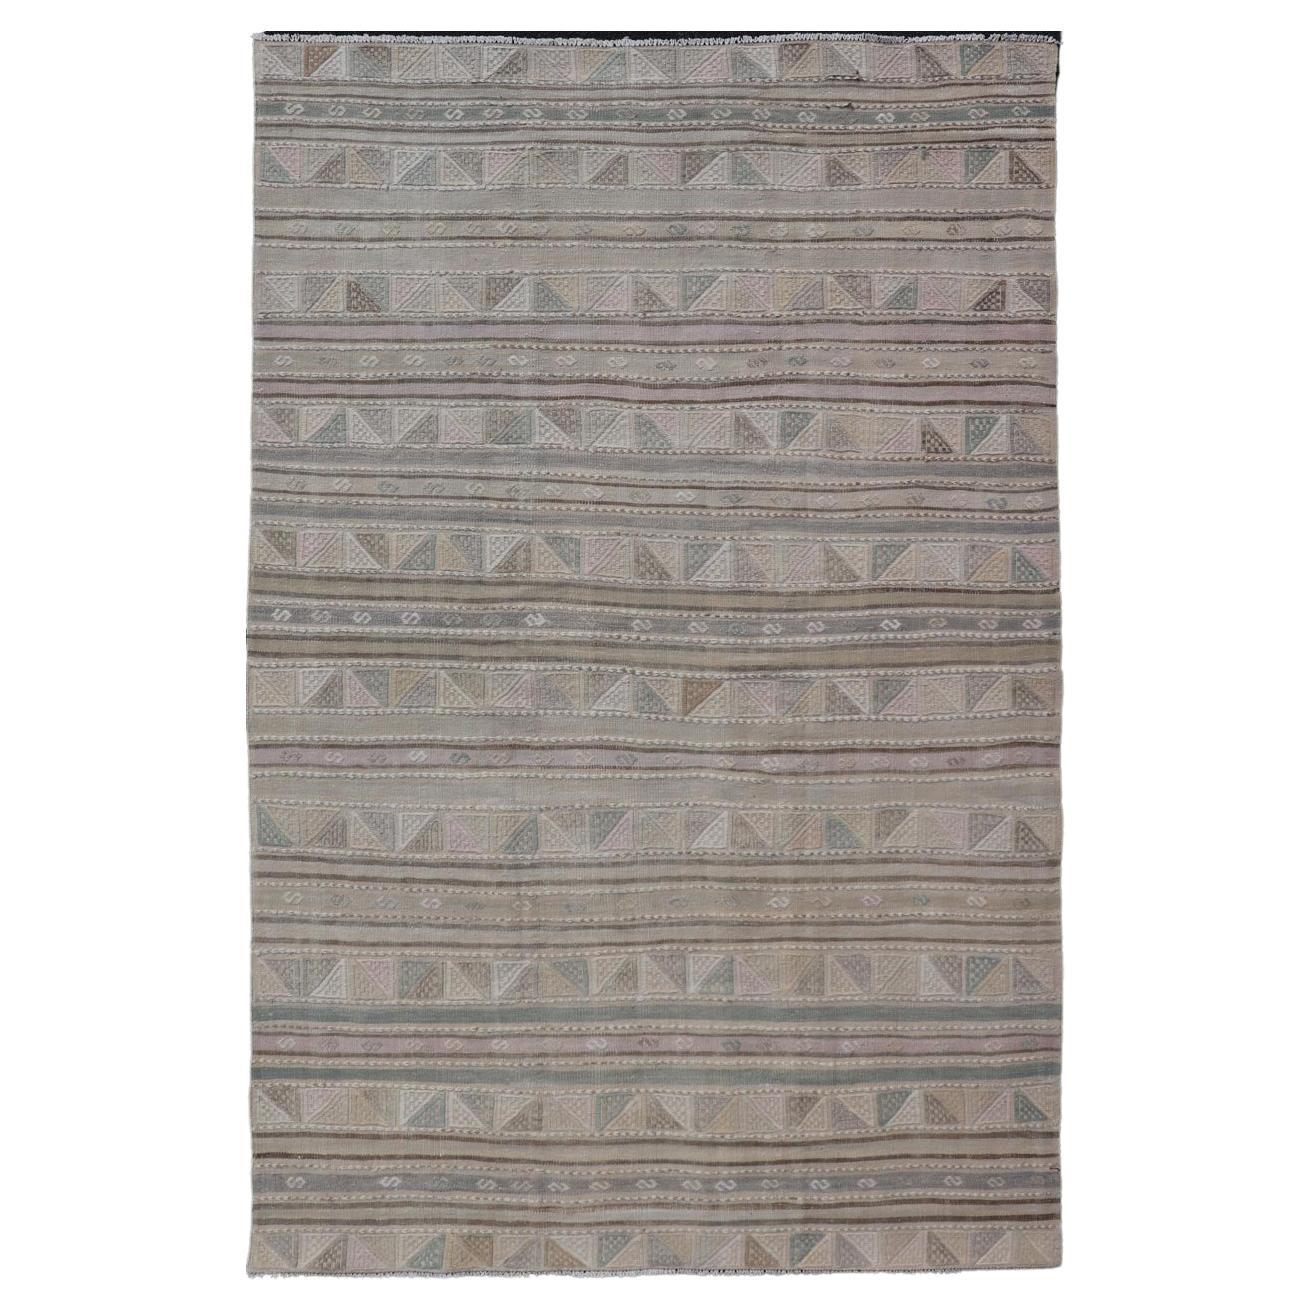 Turkish Flat-Weave with Embroideries Kilim in Taupe, Green, Brown, and Tan For Sale